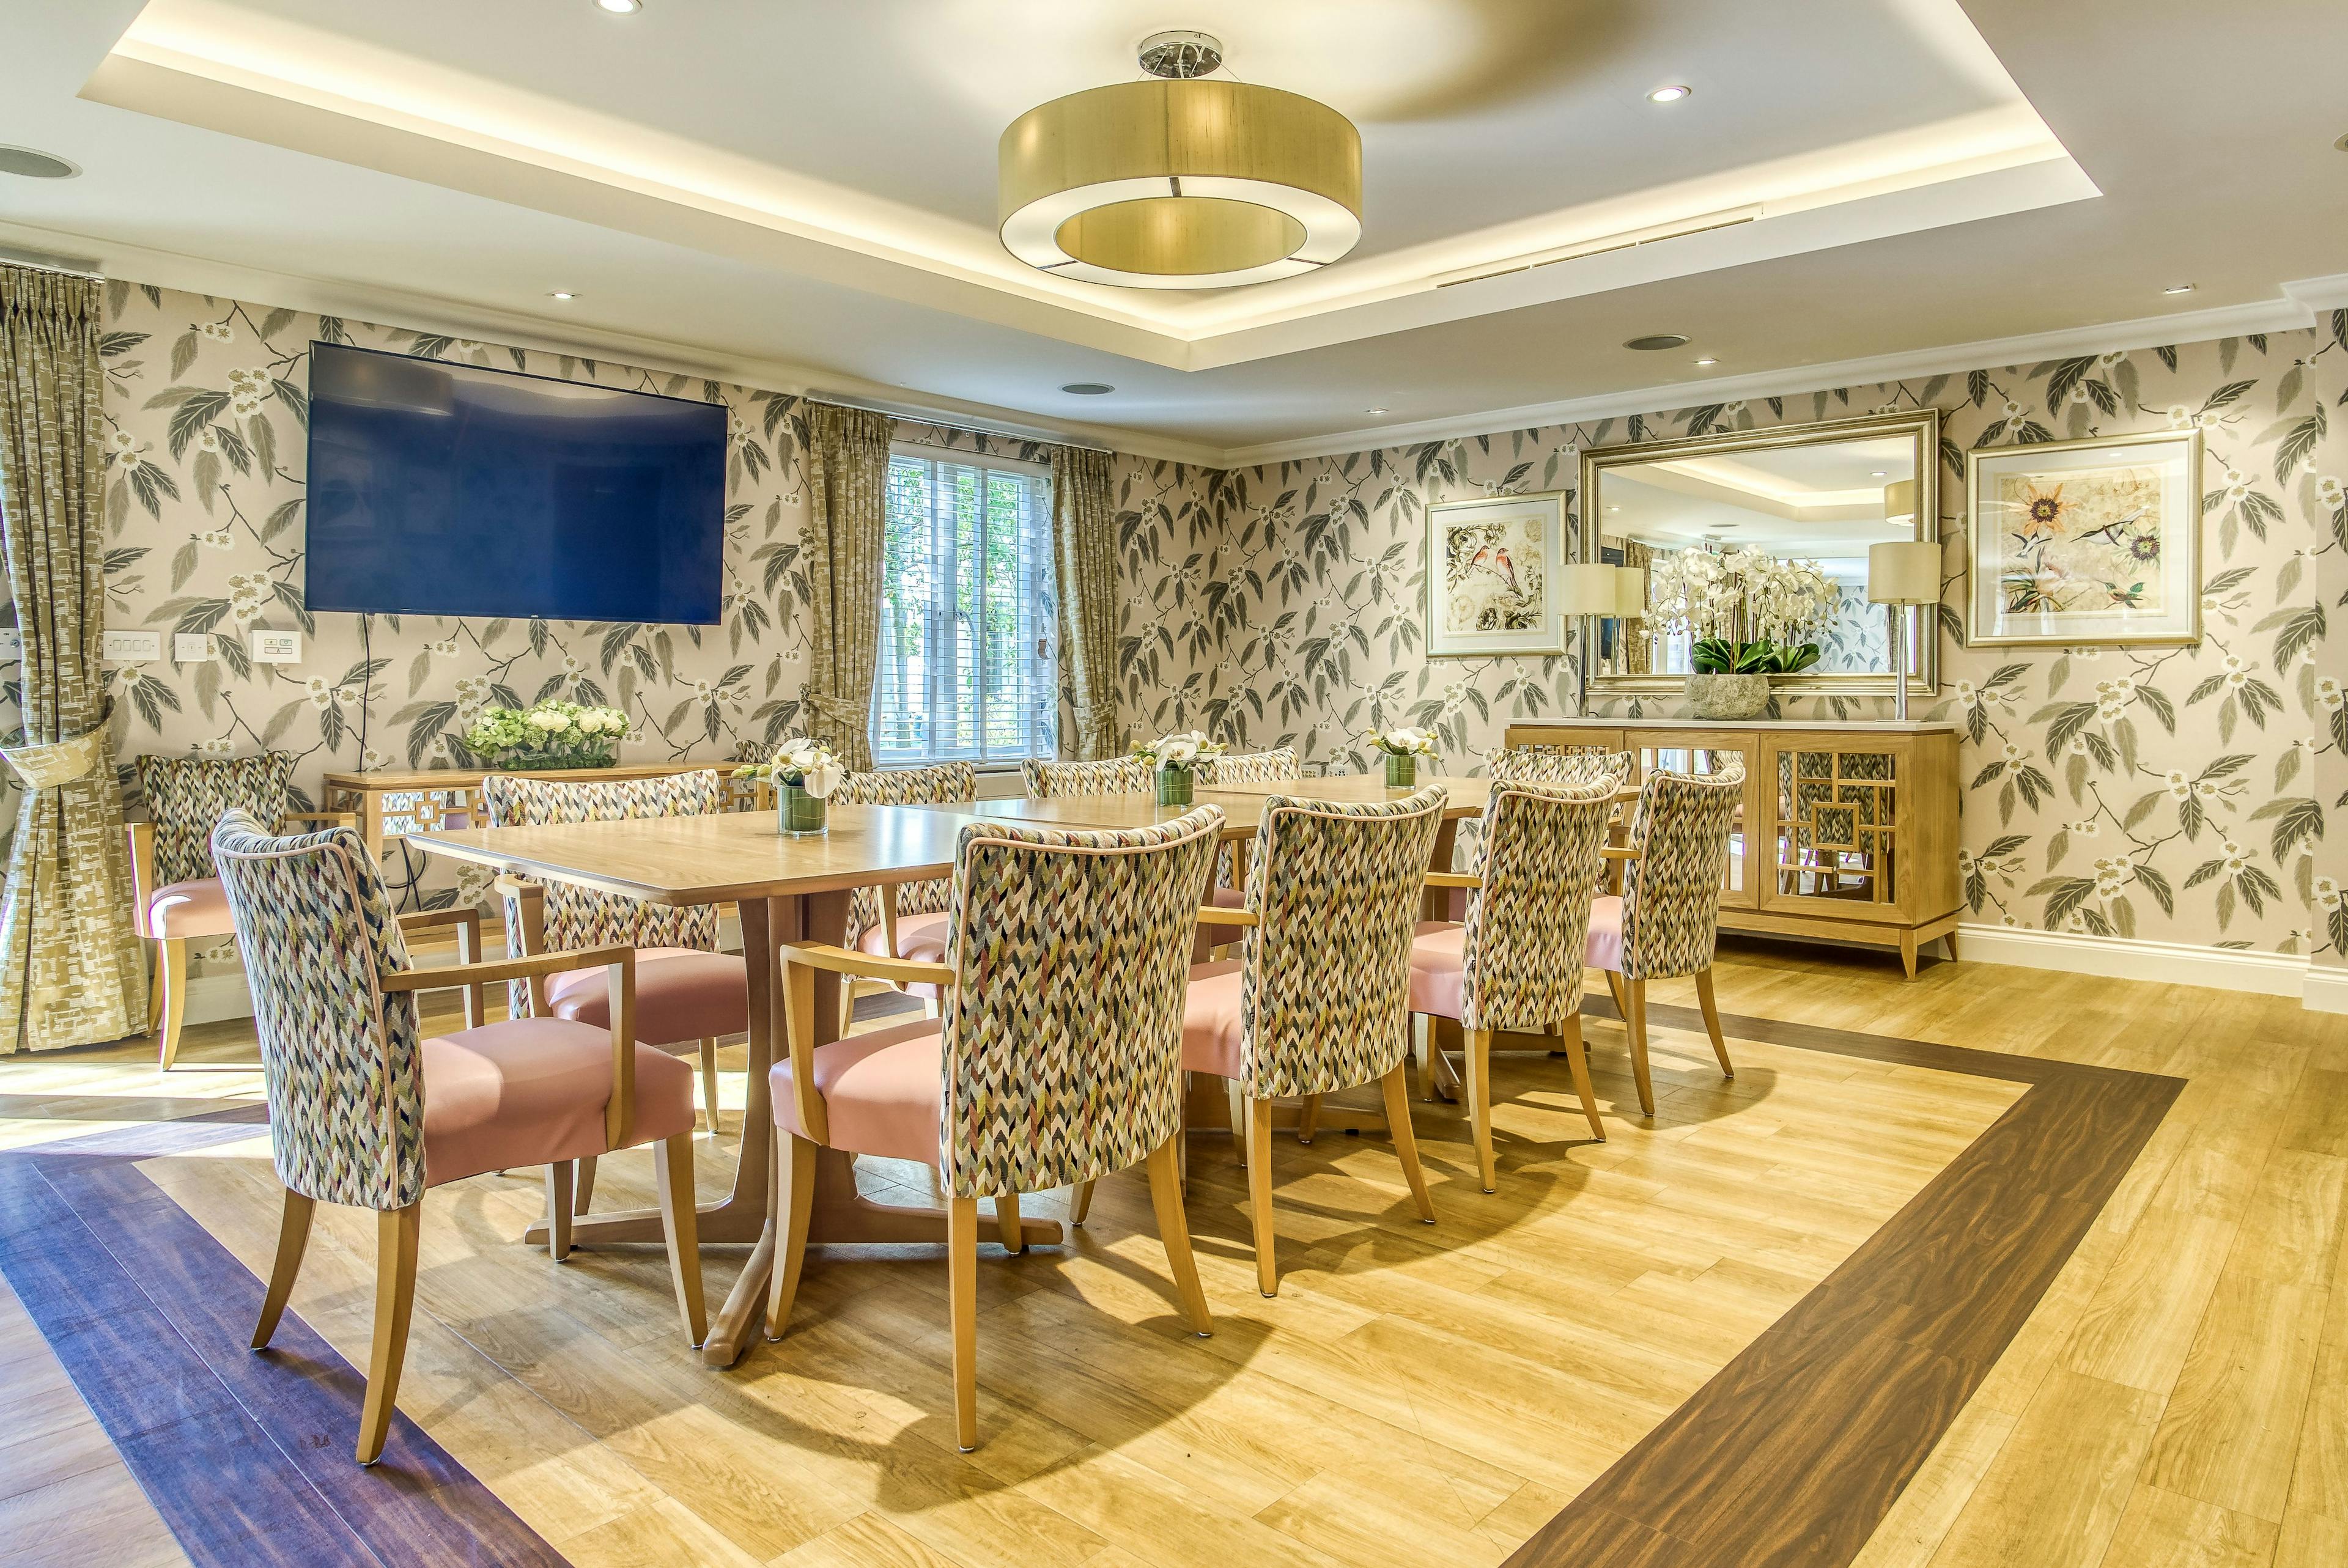 Dining area of Northampton care home in Northampton, East Midlands